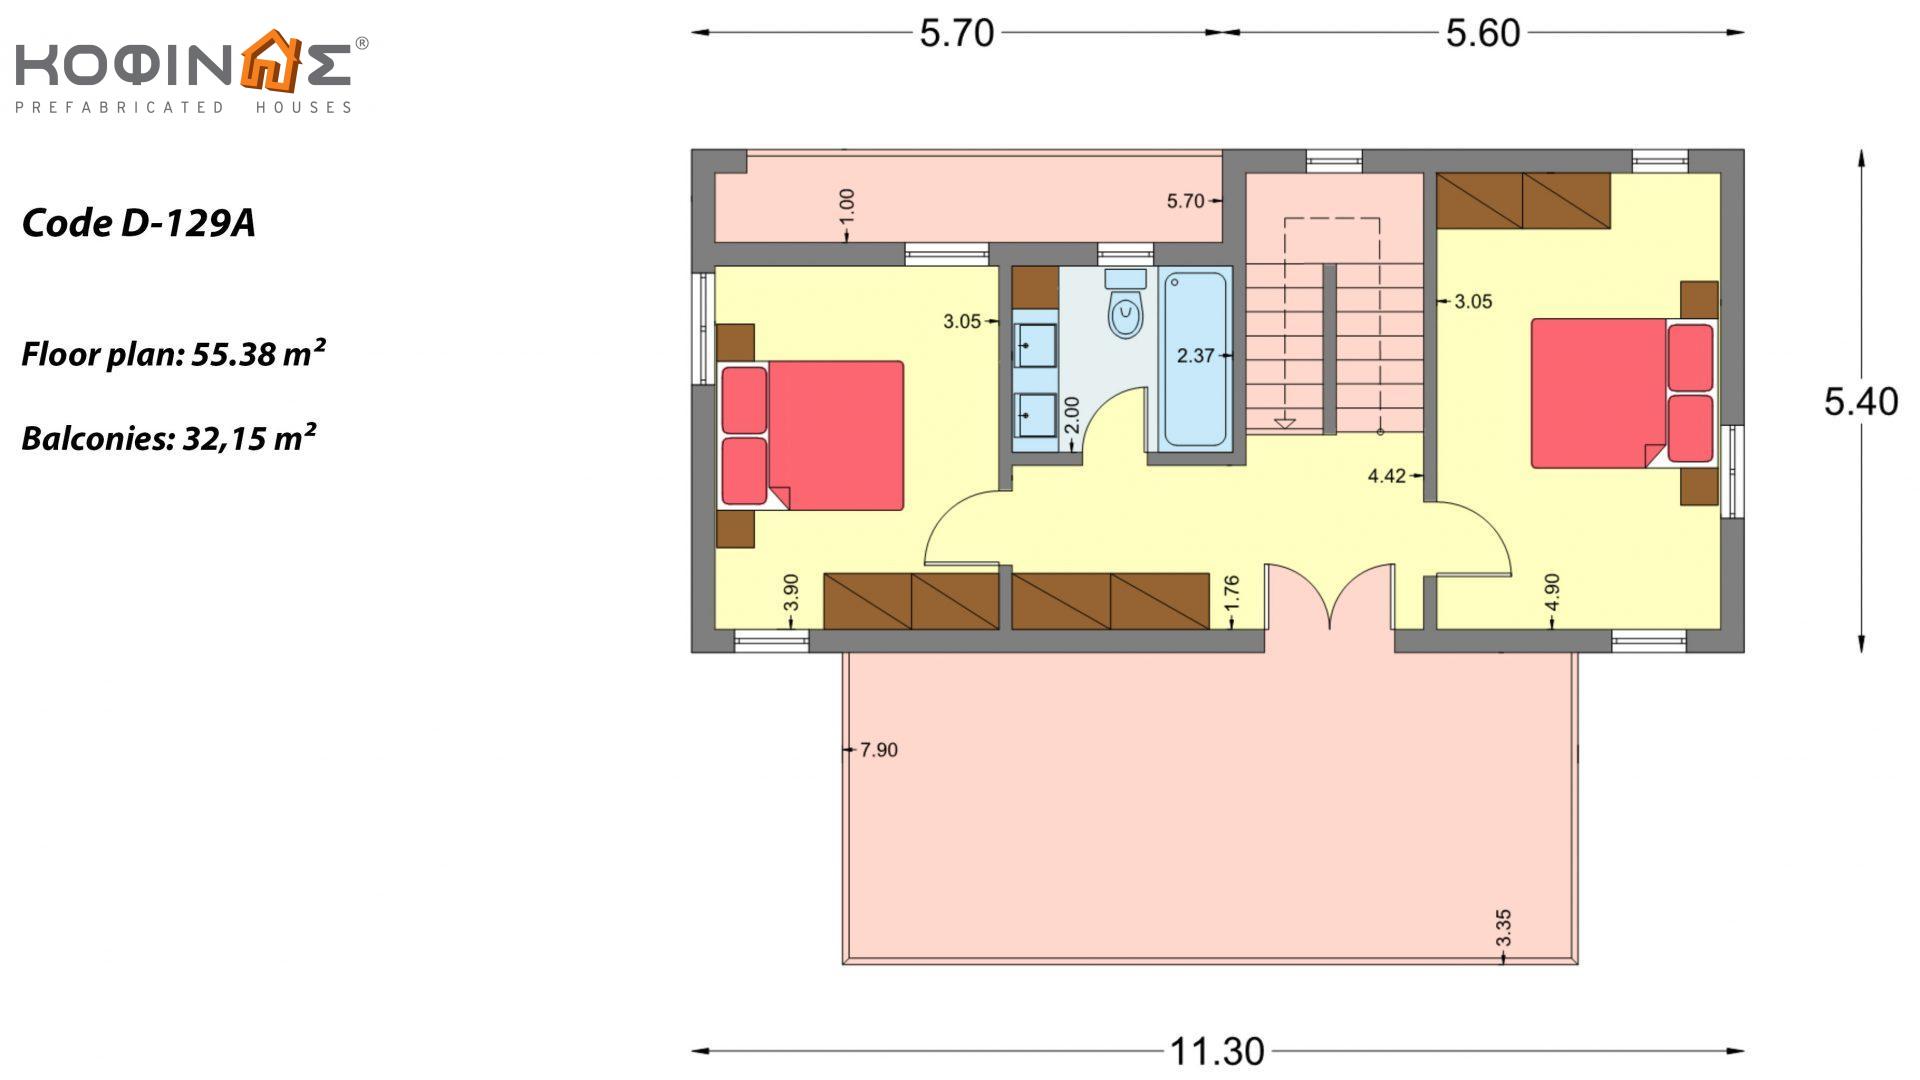 2-story house D-129A, total surface of 129,45 m²,covered roofed areas 13.39 m²,balconies 32.15 m²